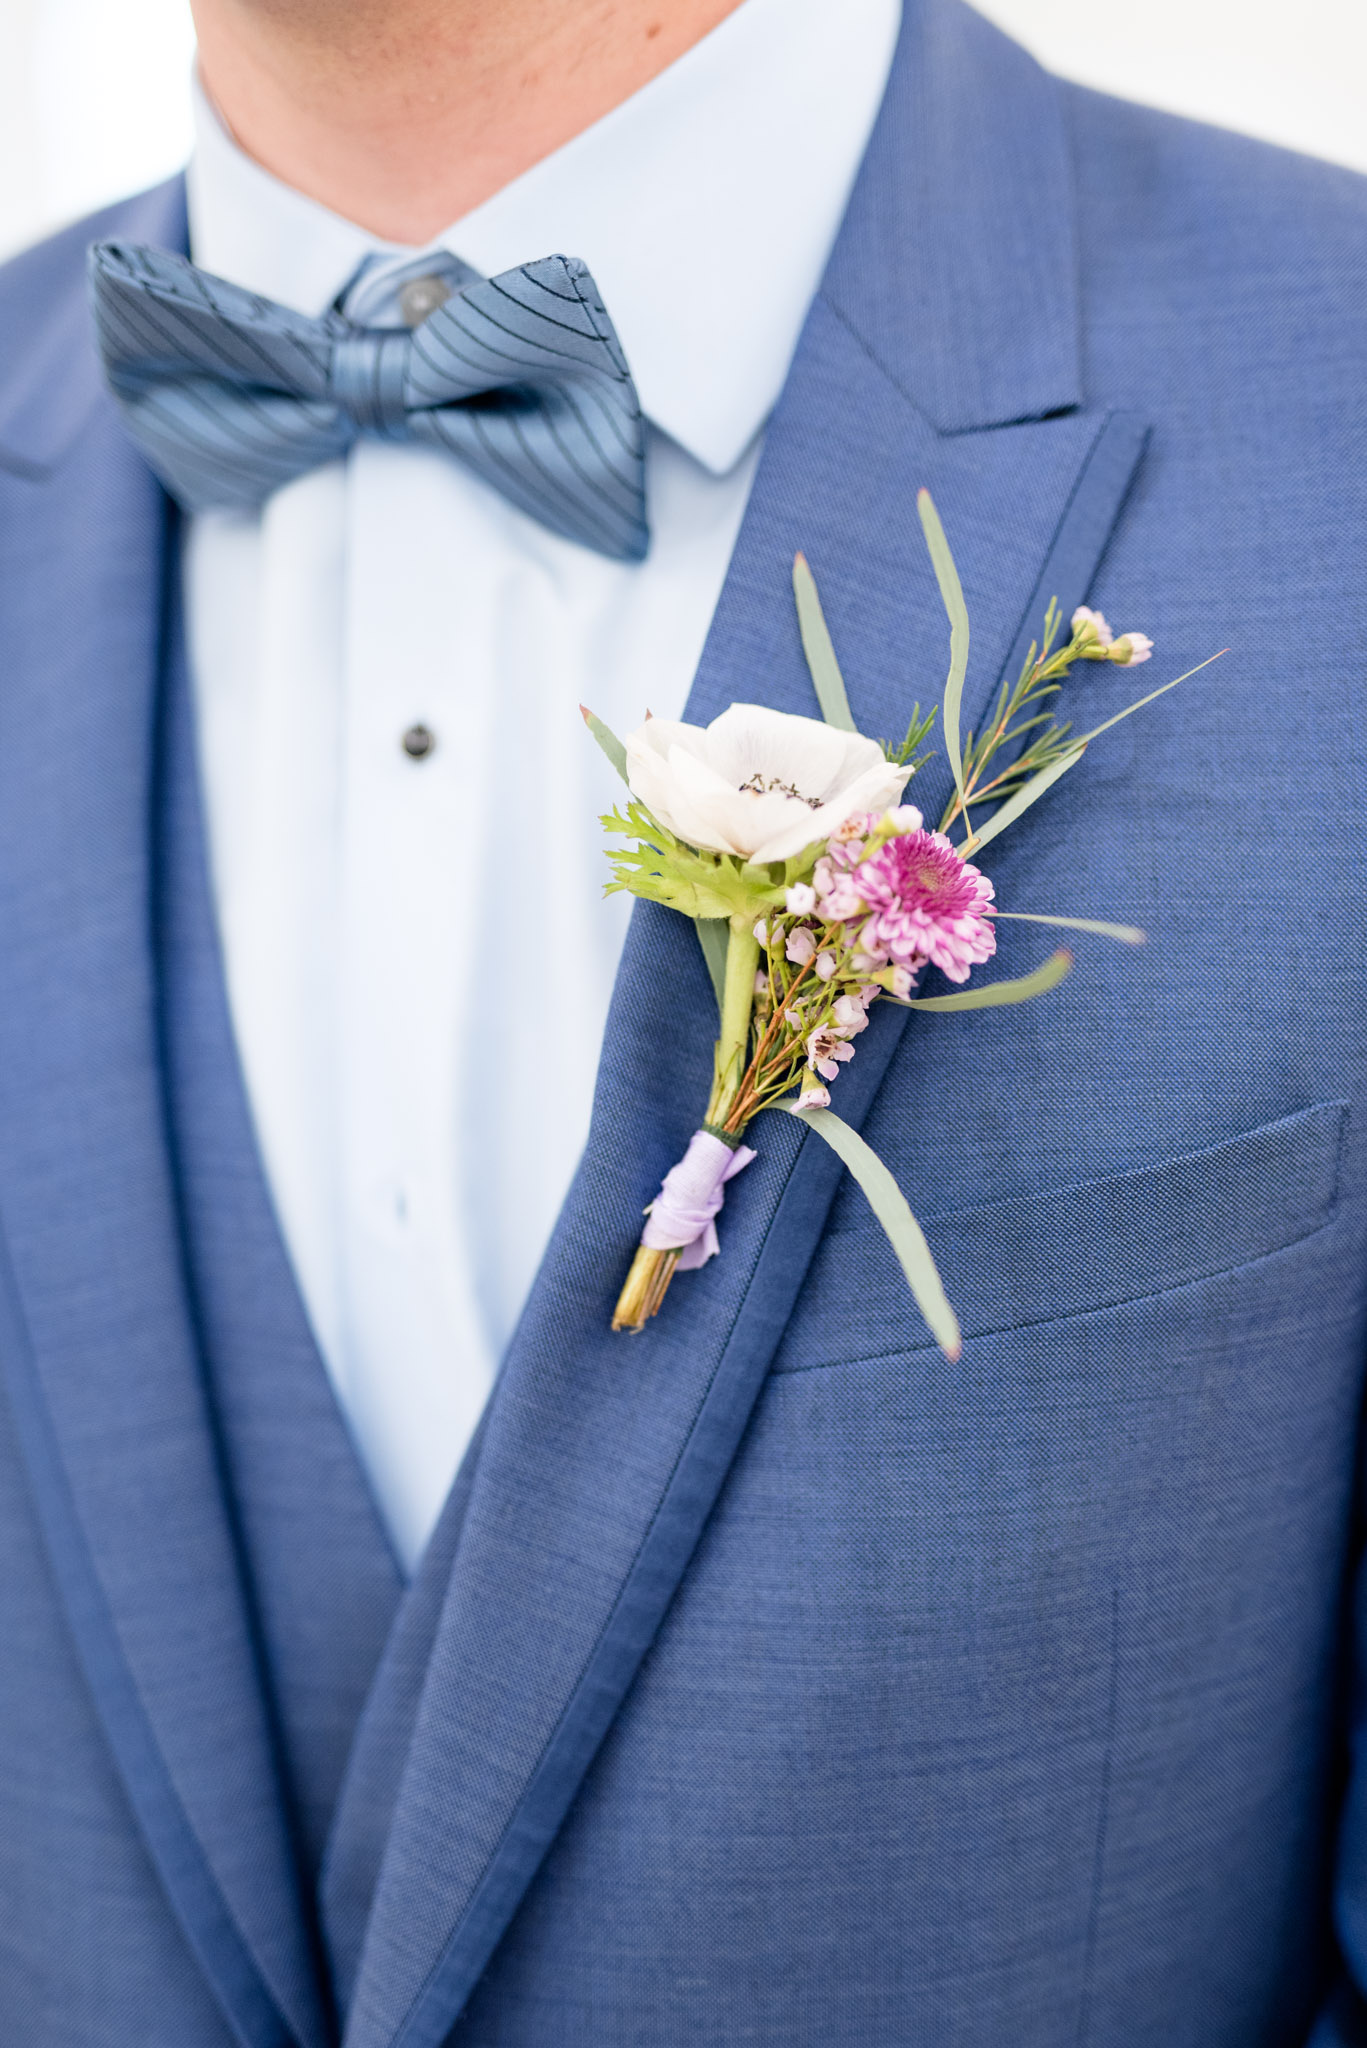 Groom's boutonniere's